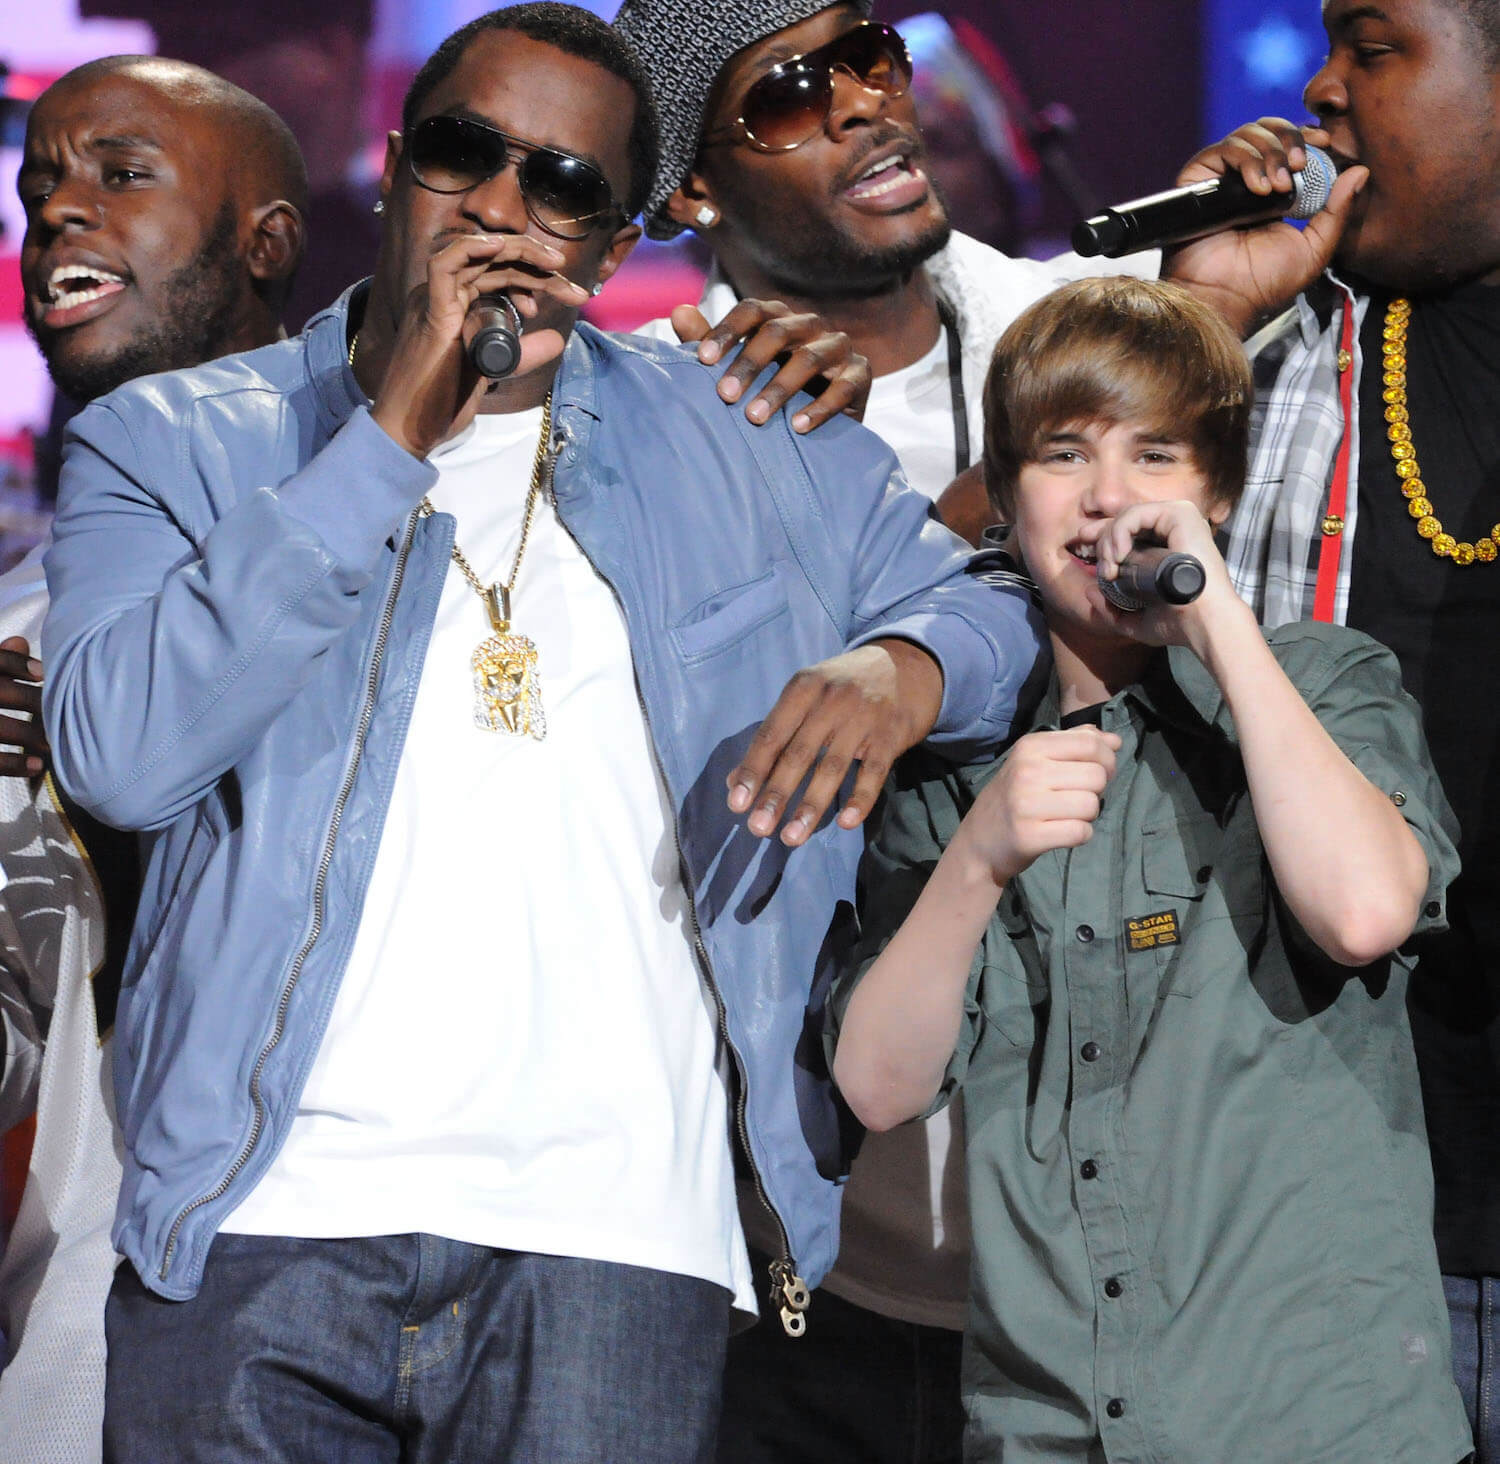 Sean ‘P. Diddy’ Combs Once Said He Couldn’t ‘Disclose’ Why He Was Hanging Out With 15-Year-Old Justin Bieber